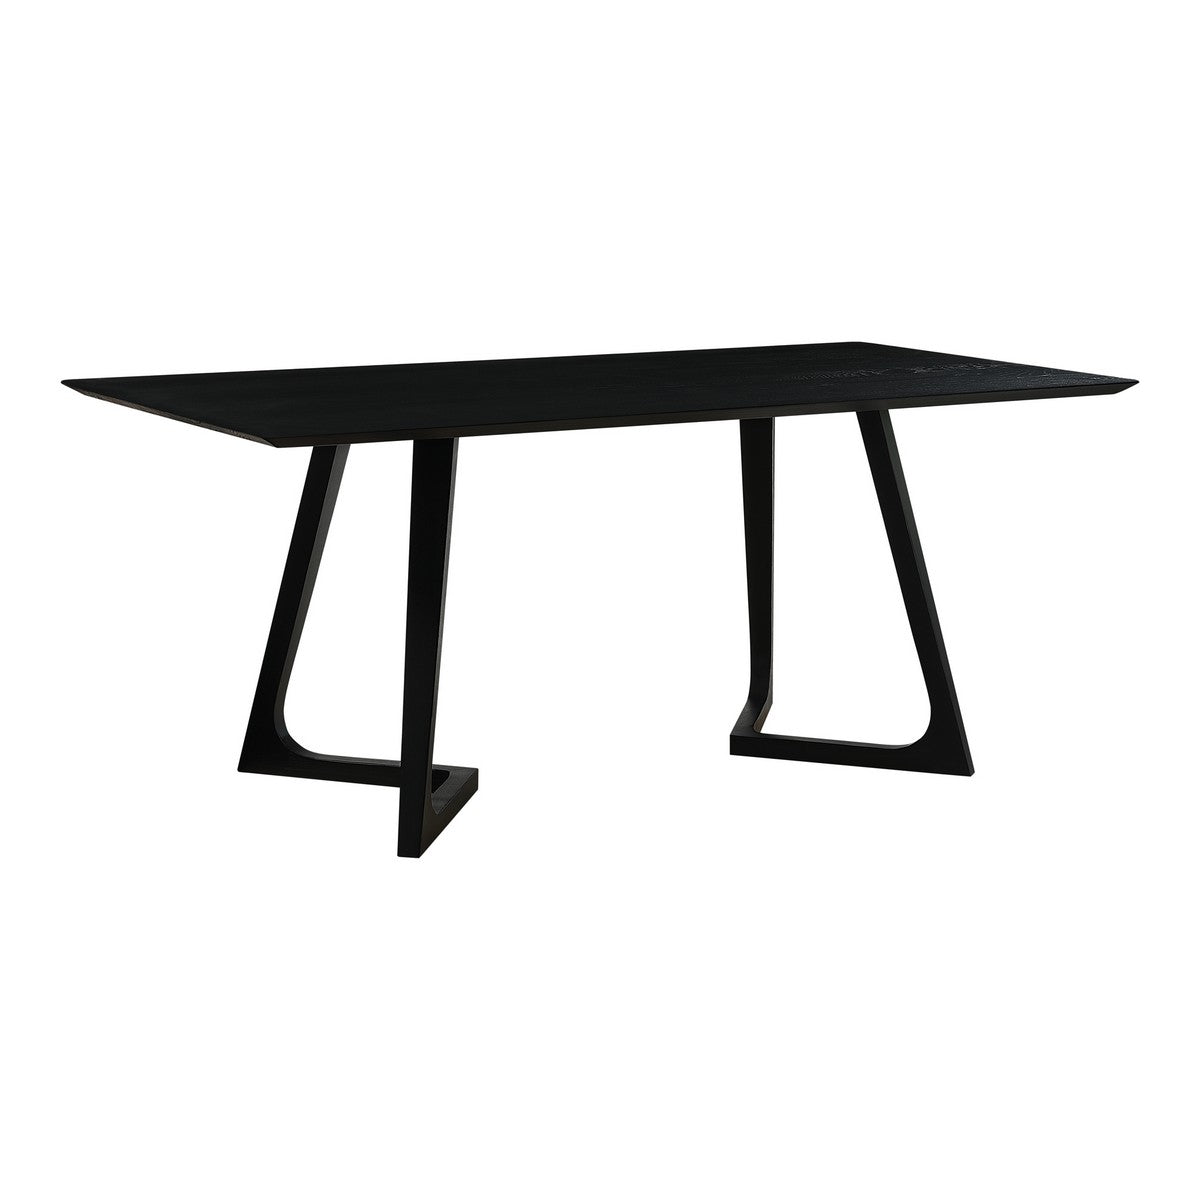 Moe's Home Collection Godenza Dining Table Rectangular Black Ash - CB-1004-02